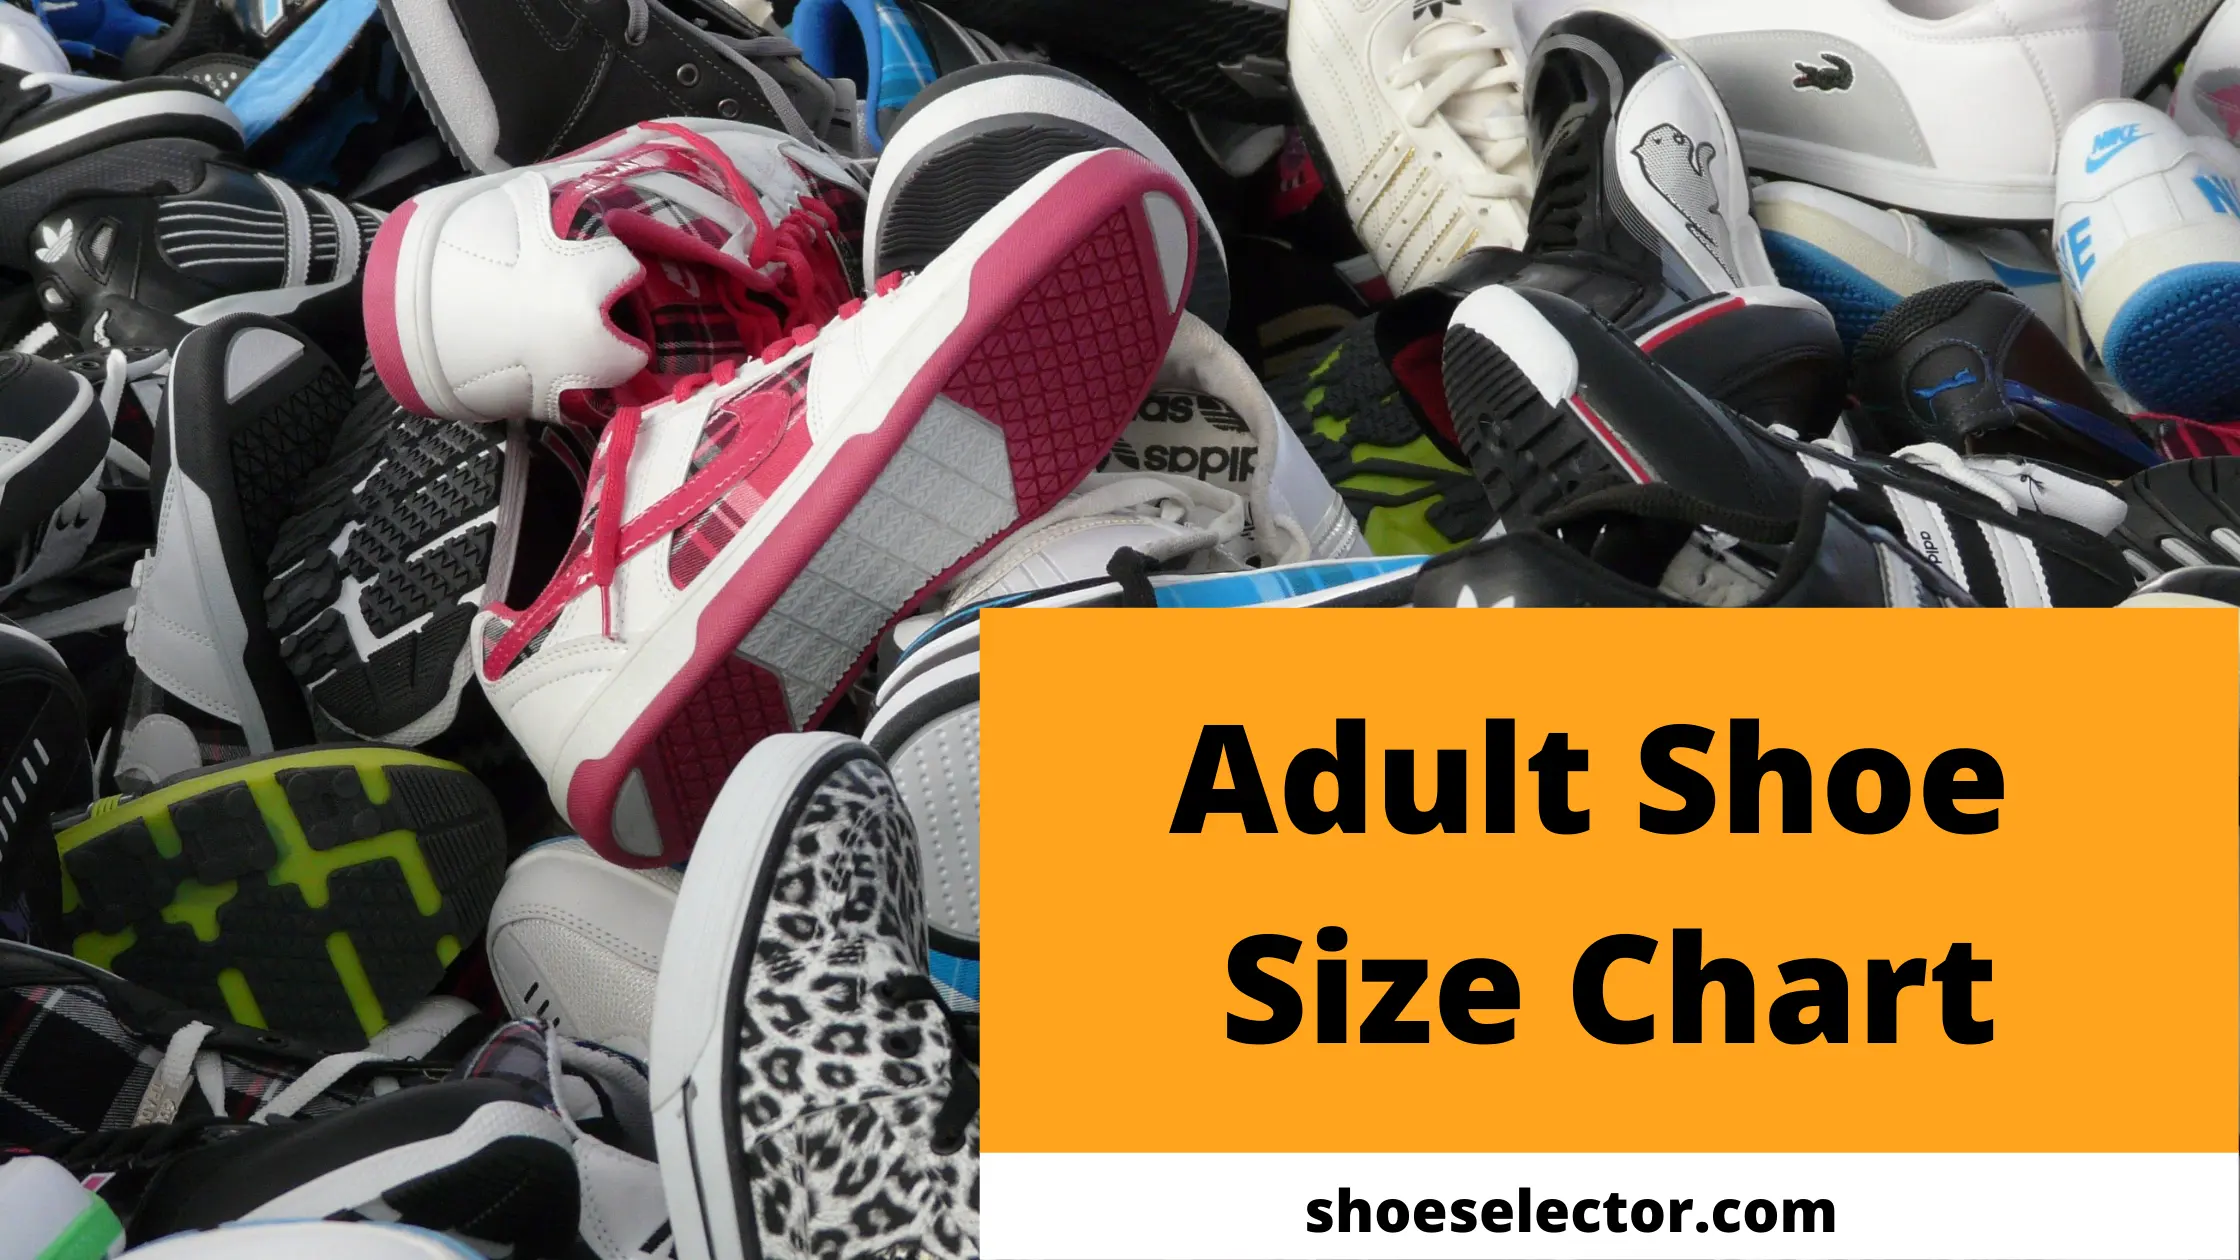 Adult Shoe Size Chart: How to Find the Perfect Fit